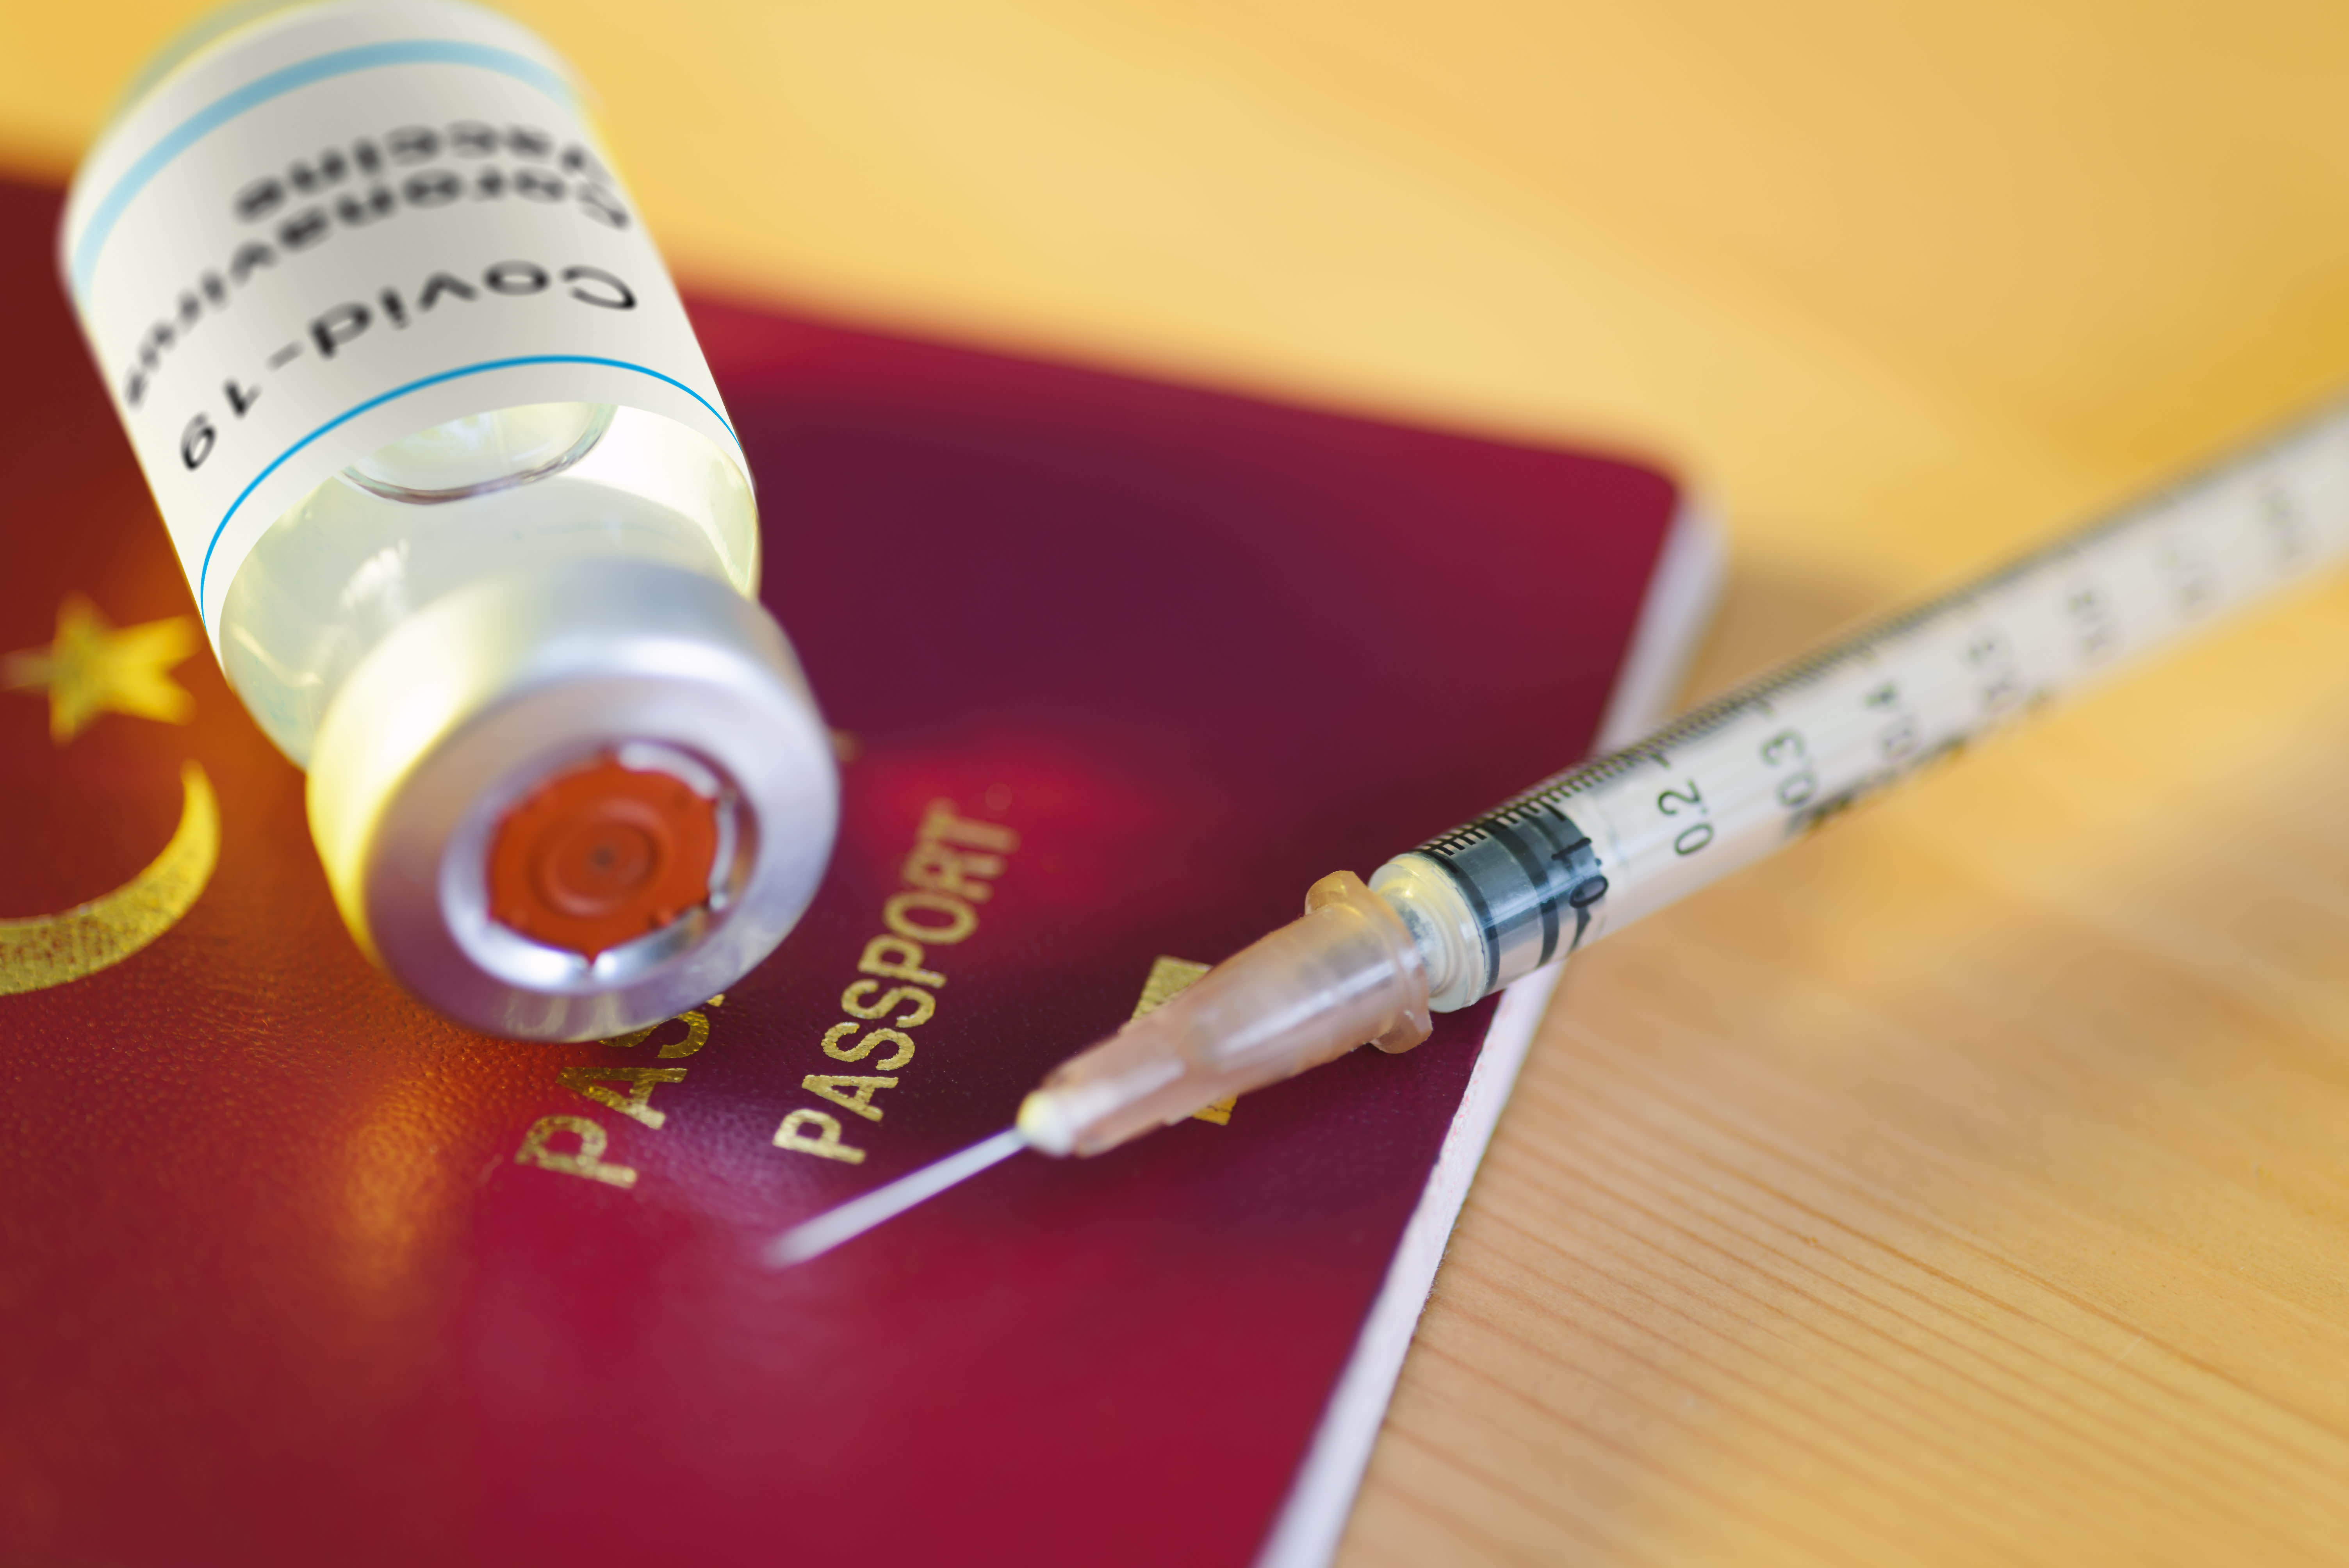 Will I need proof of the vaccine to travel abroad?